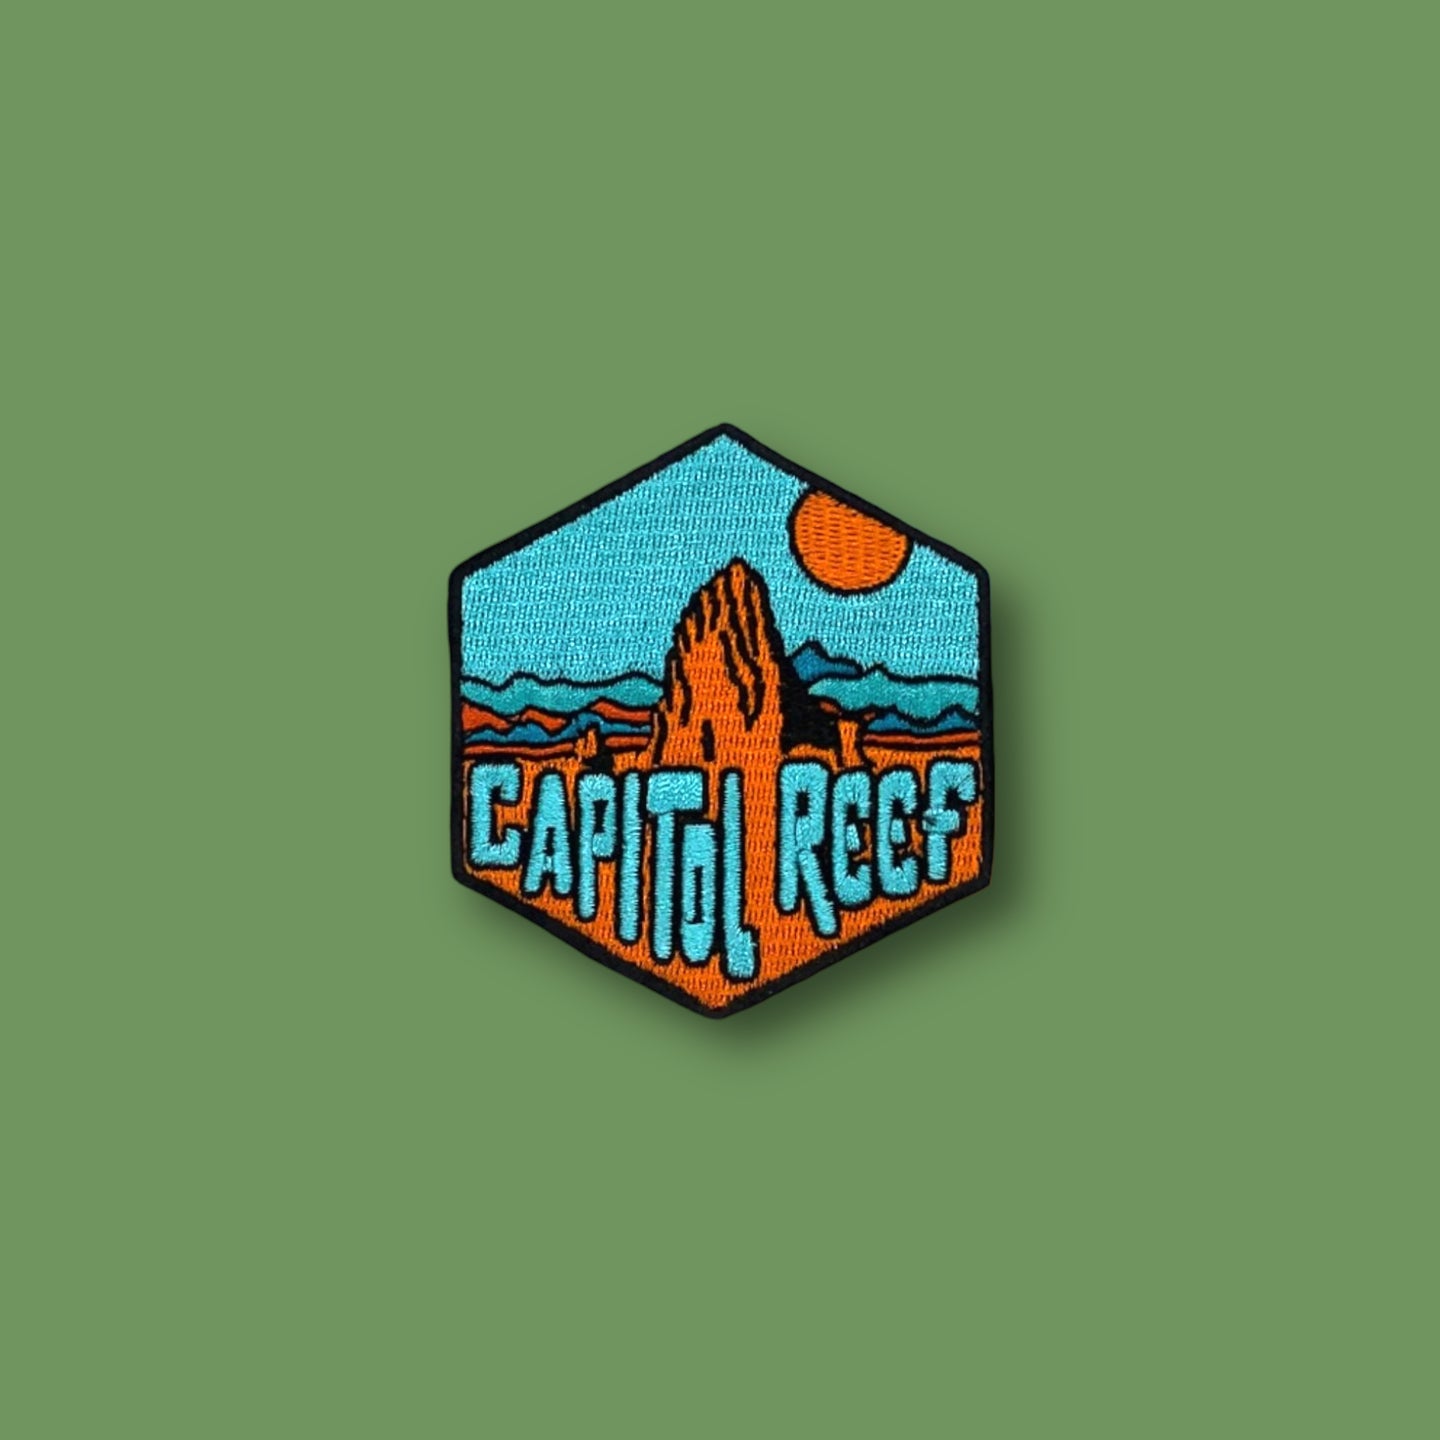 Capitol Reef Patch